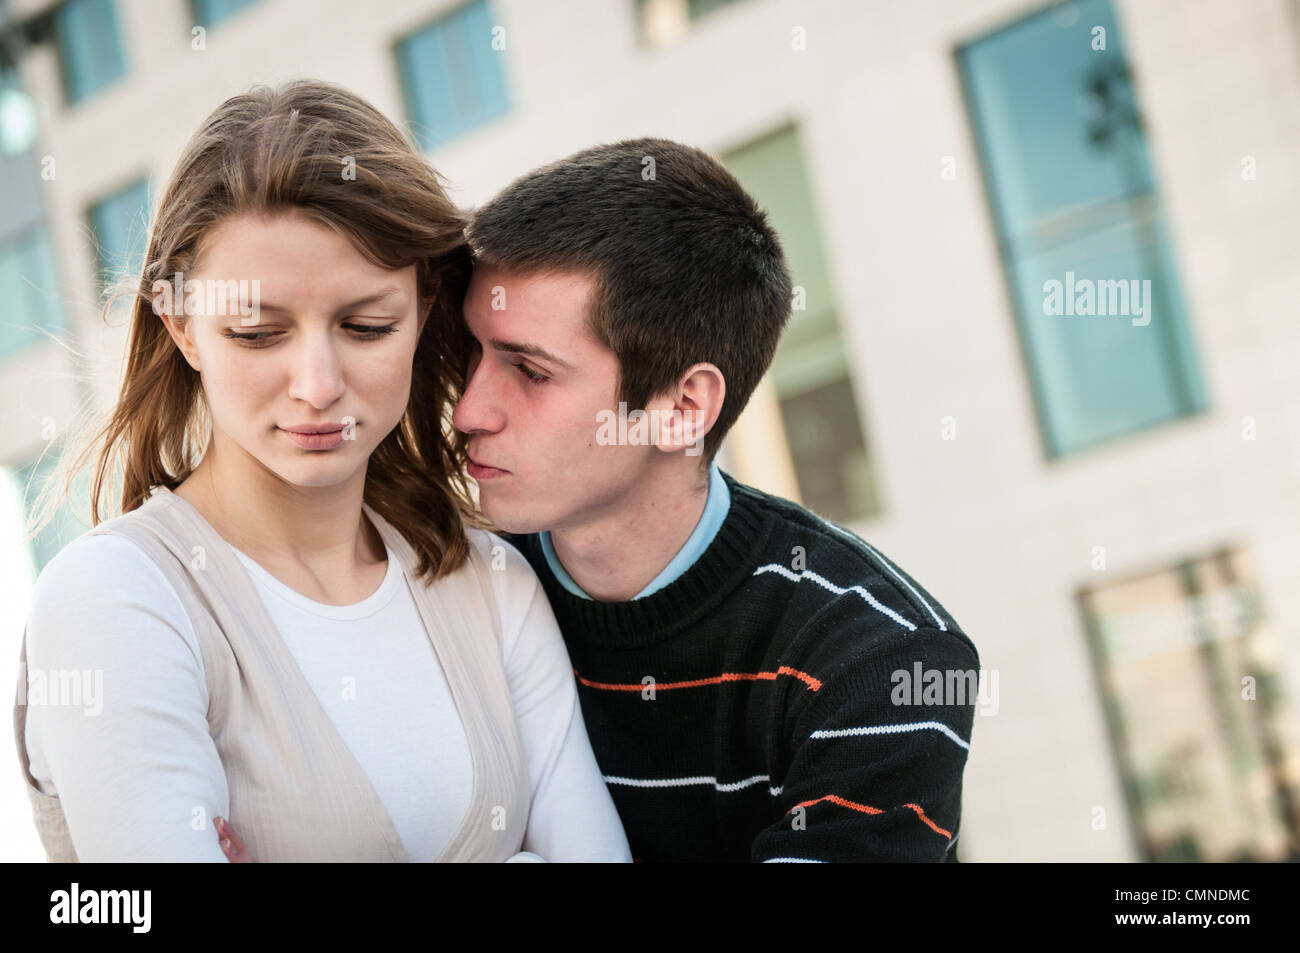 Relationship problems - man trying to reconcile with offended woman Stock Photo